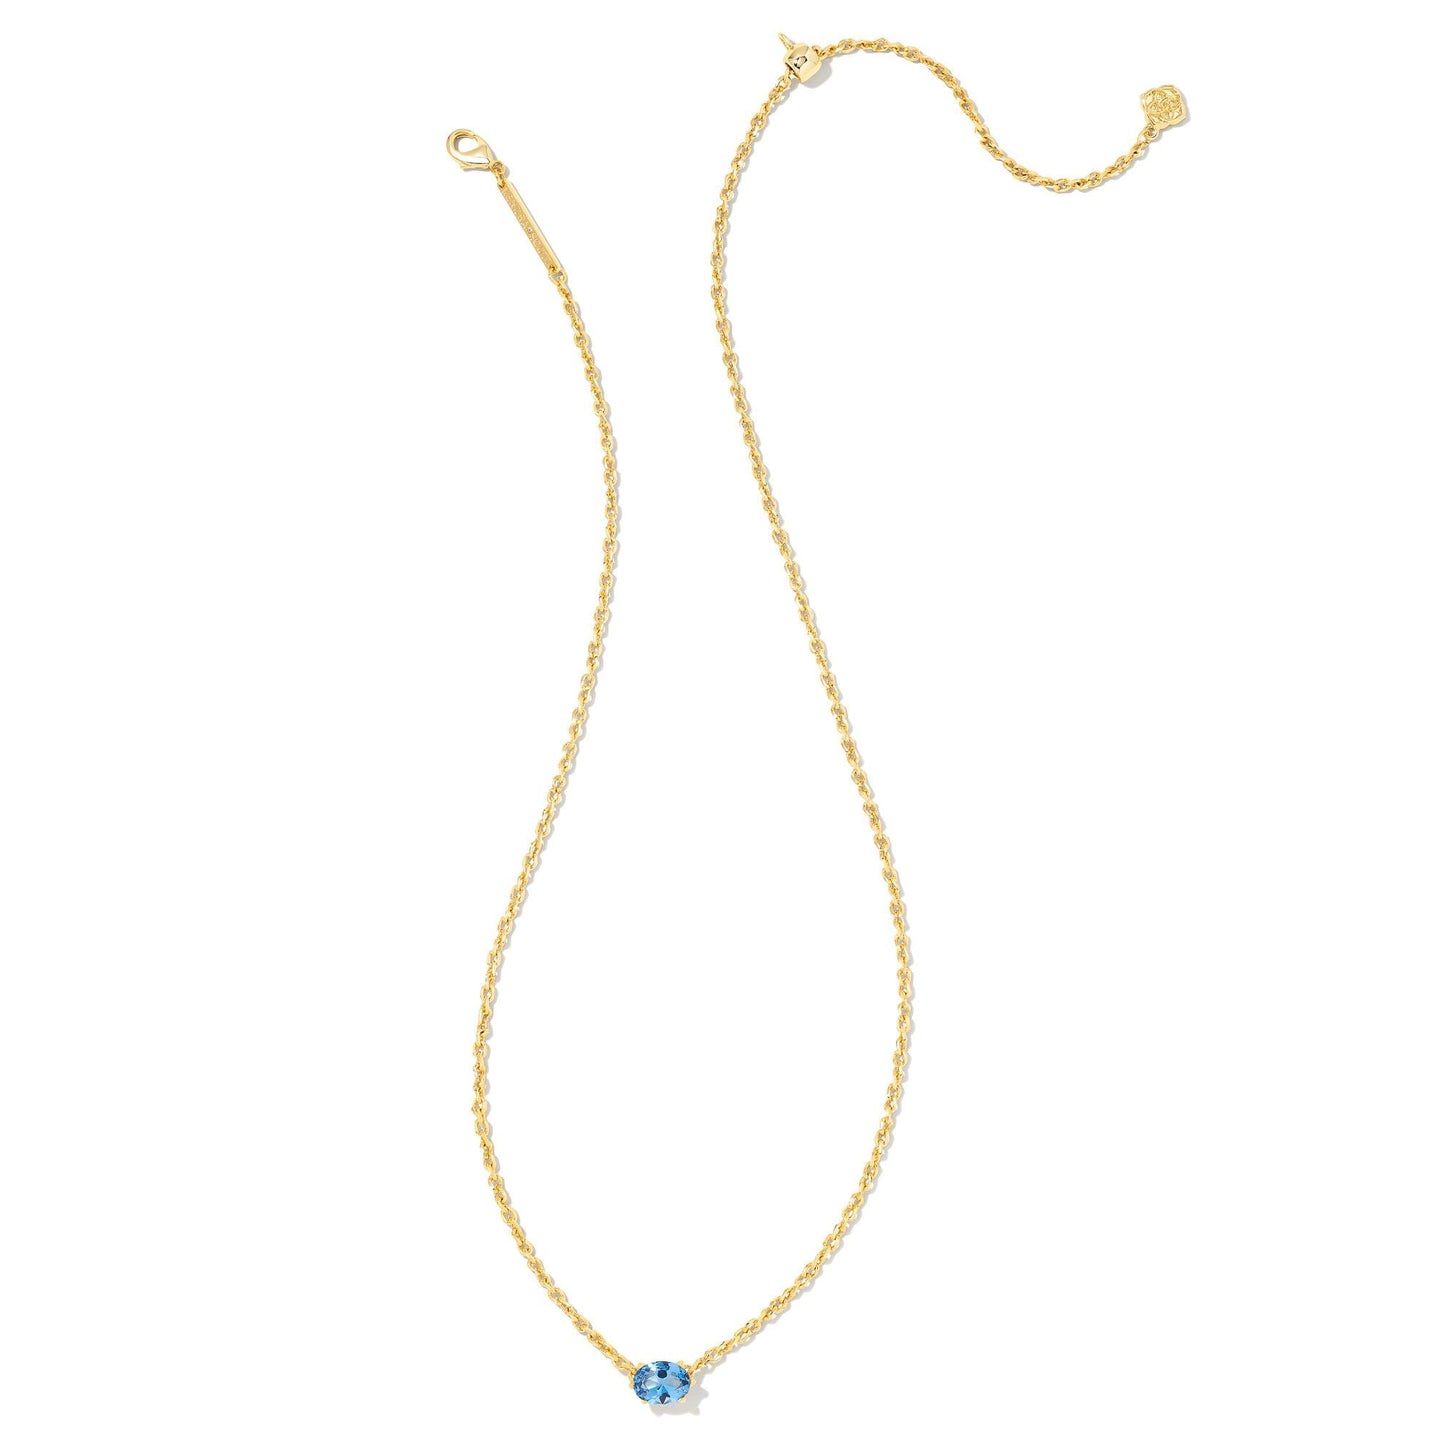 Cailin Crystal Necklace in Gold and Blue Violet Crystal